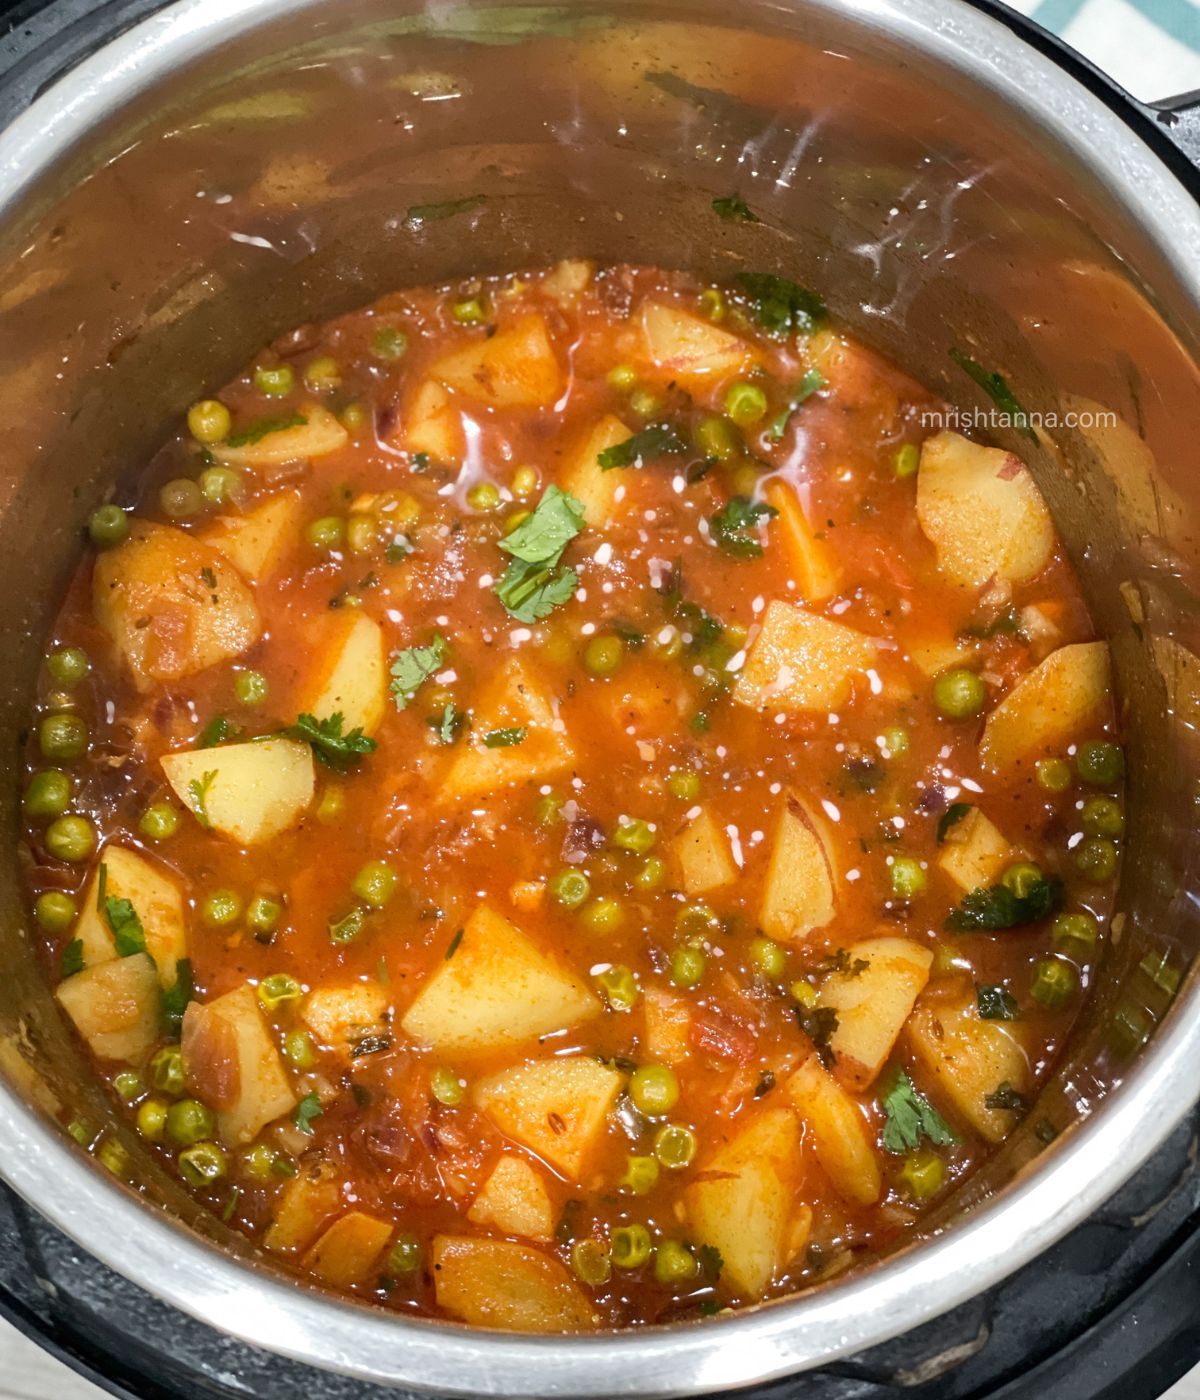 An Instant pot is full of aloo matar curry.